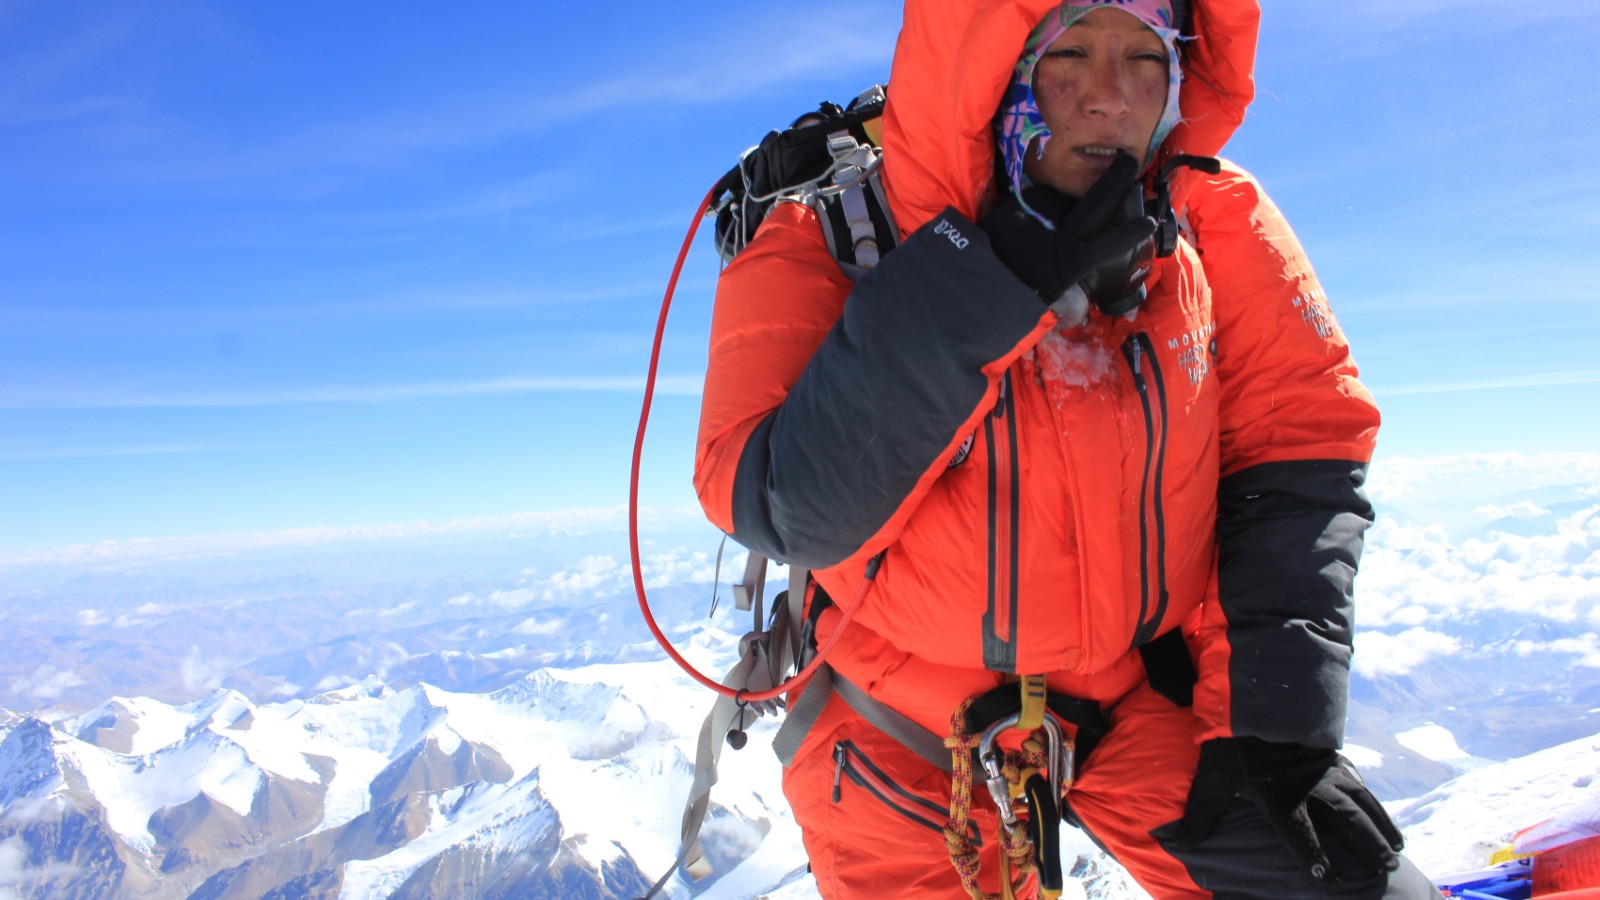 Anshu Jamsenpa First Woman To Ascend Mount Everest Twice In Five Days Cnn